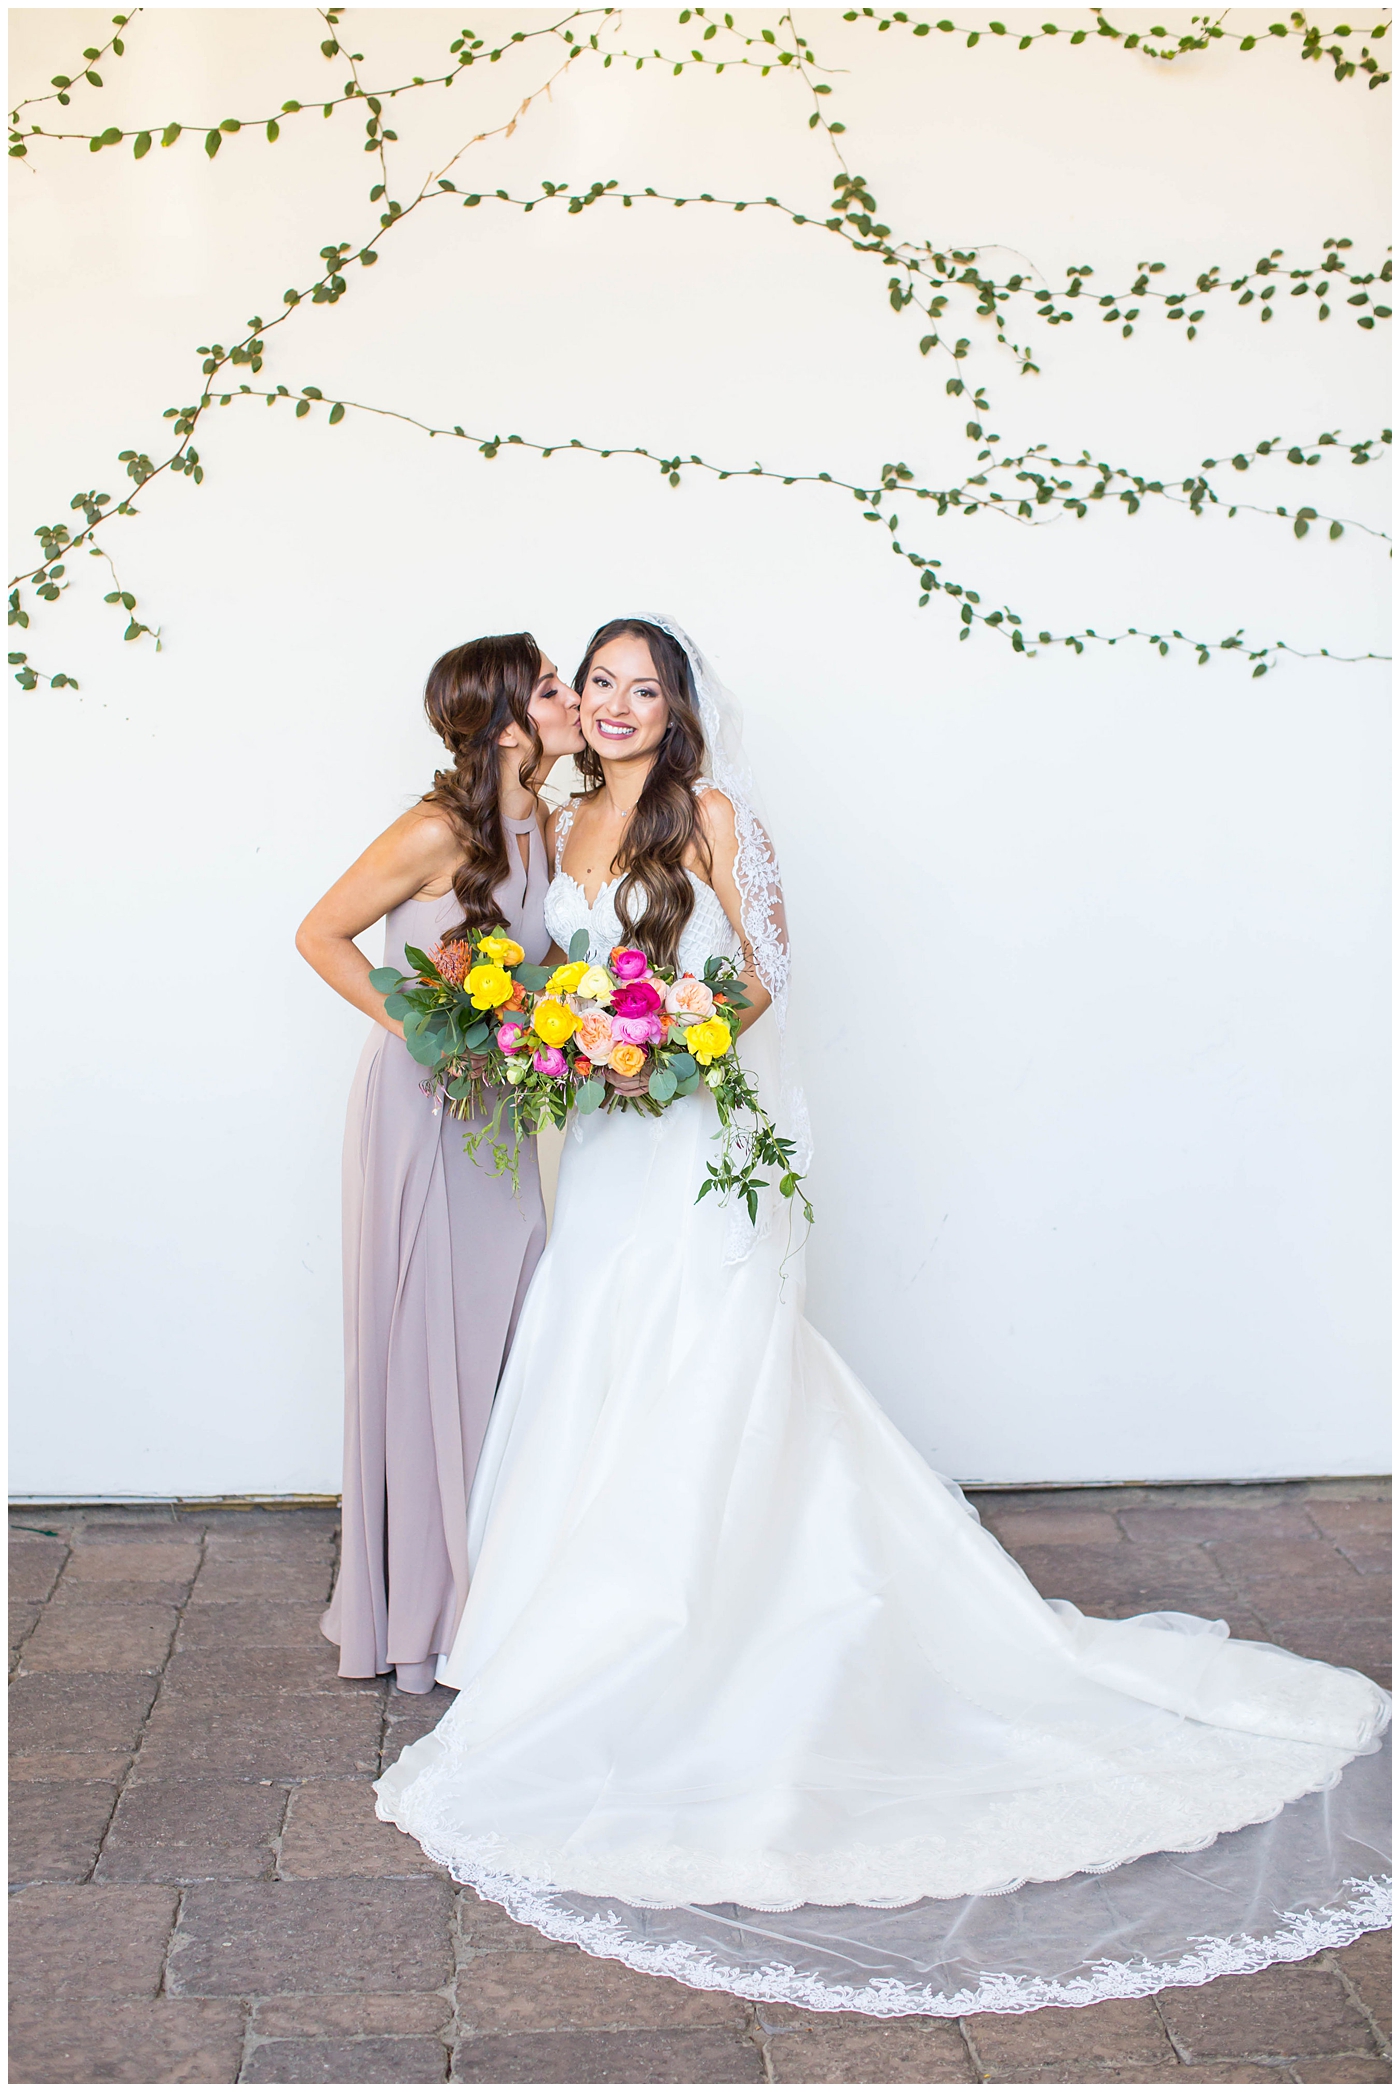 bride in lace cap sleeve wedding dress with bridesmaids in azazie dresses on wedding day with bright pink, yellow and green flower bouquets